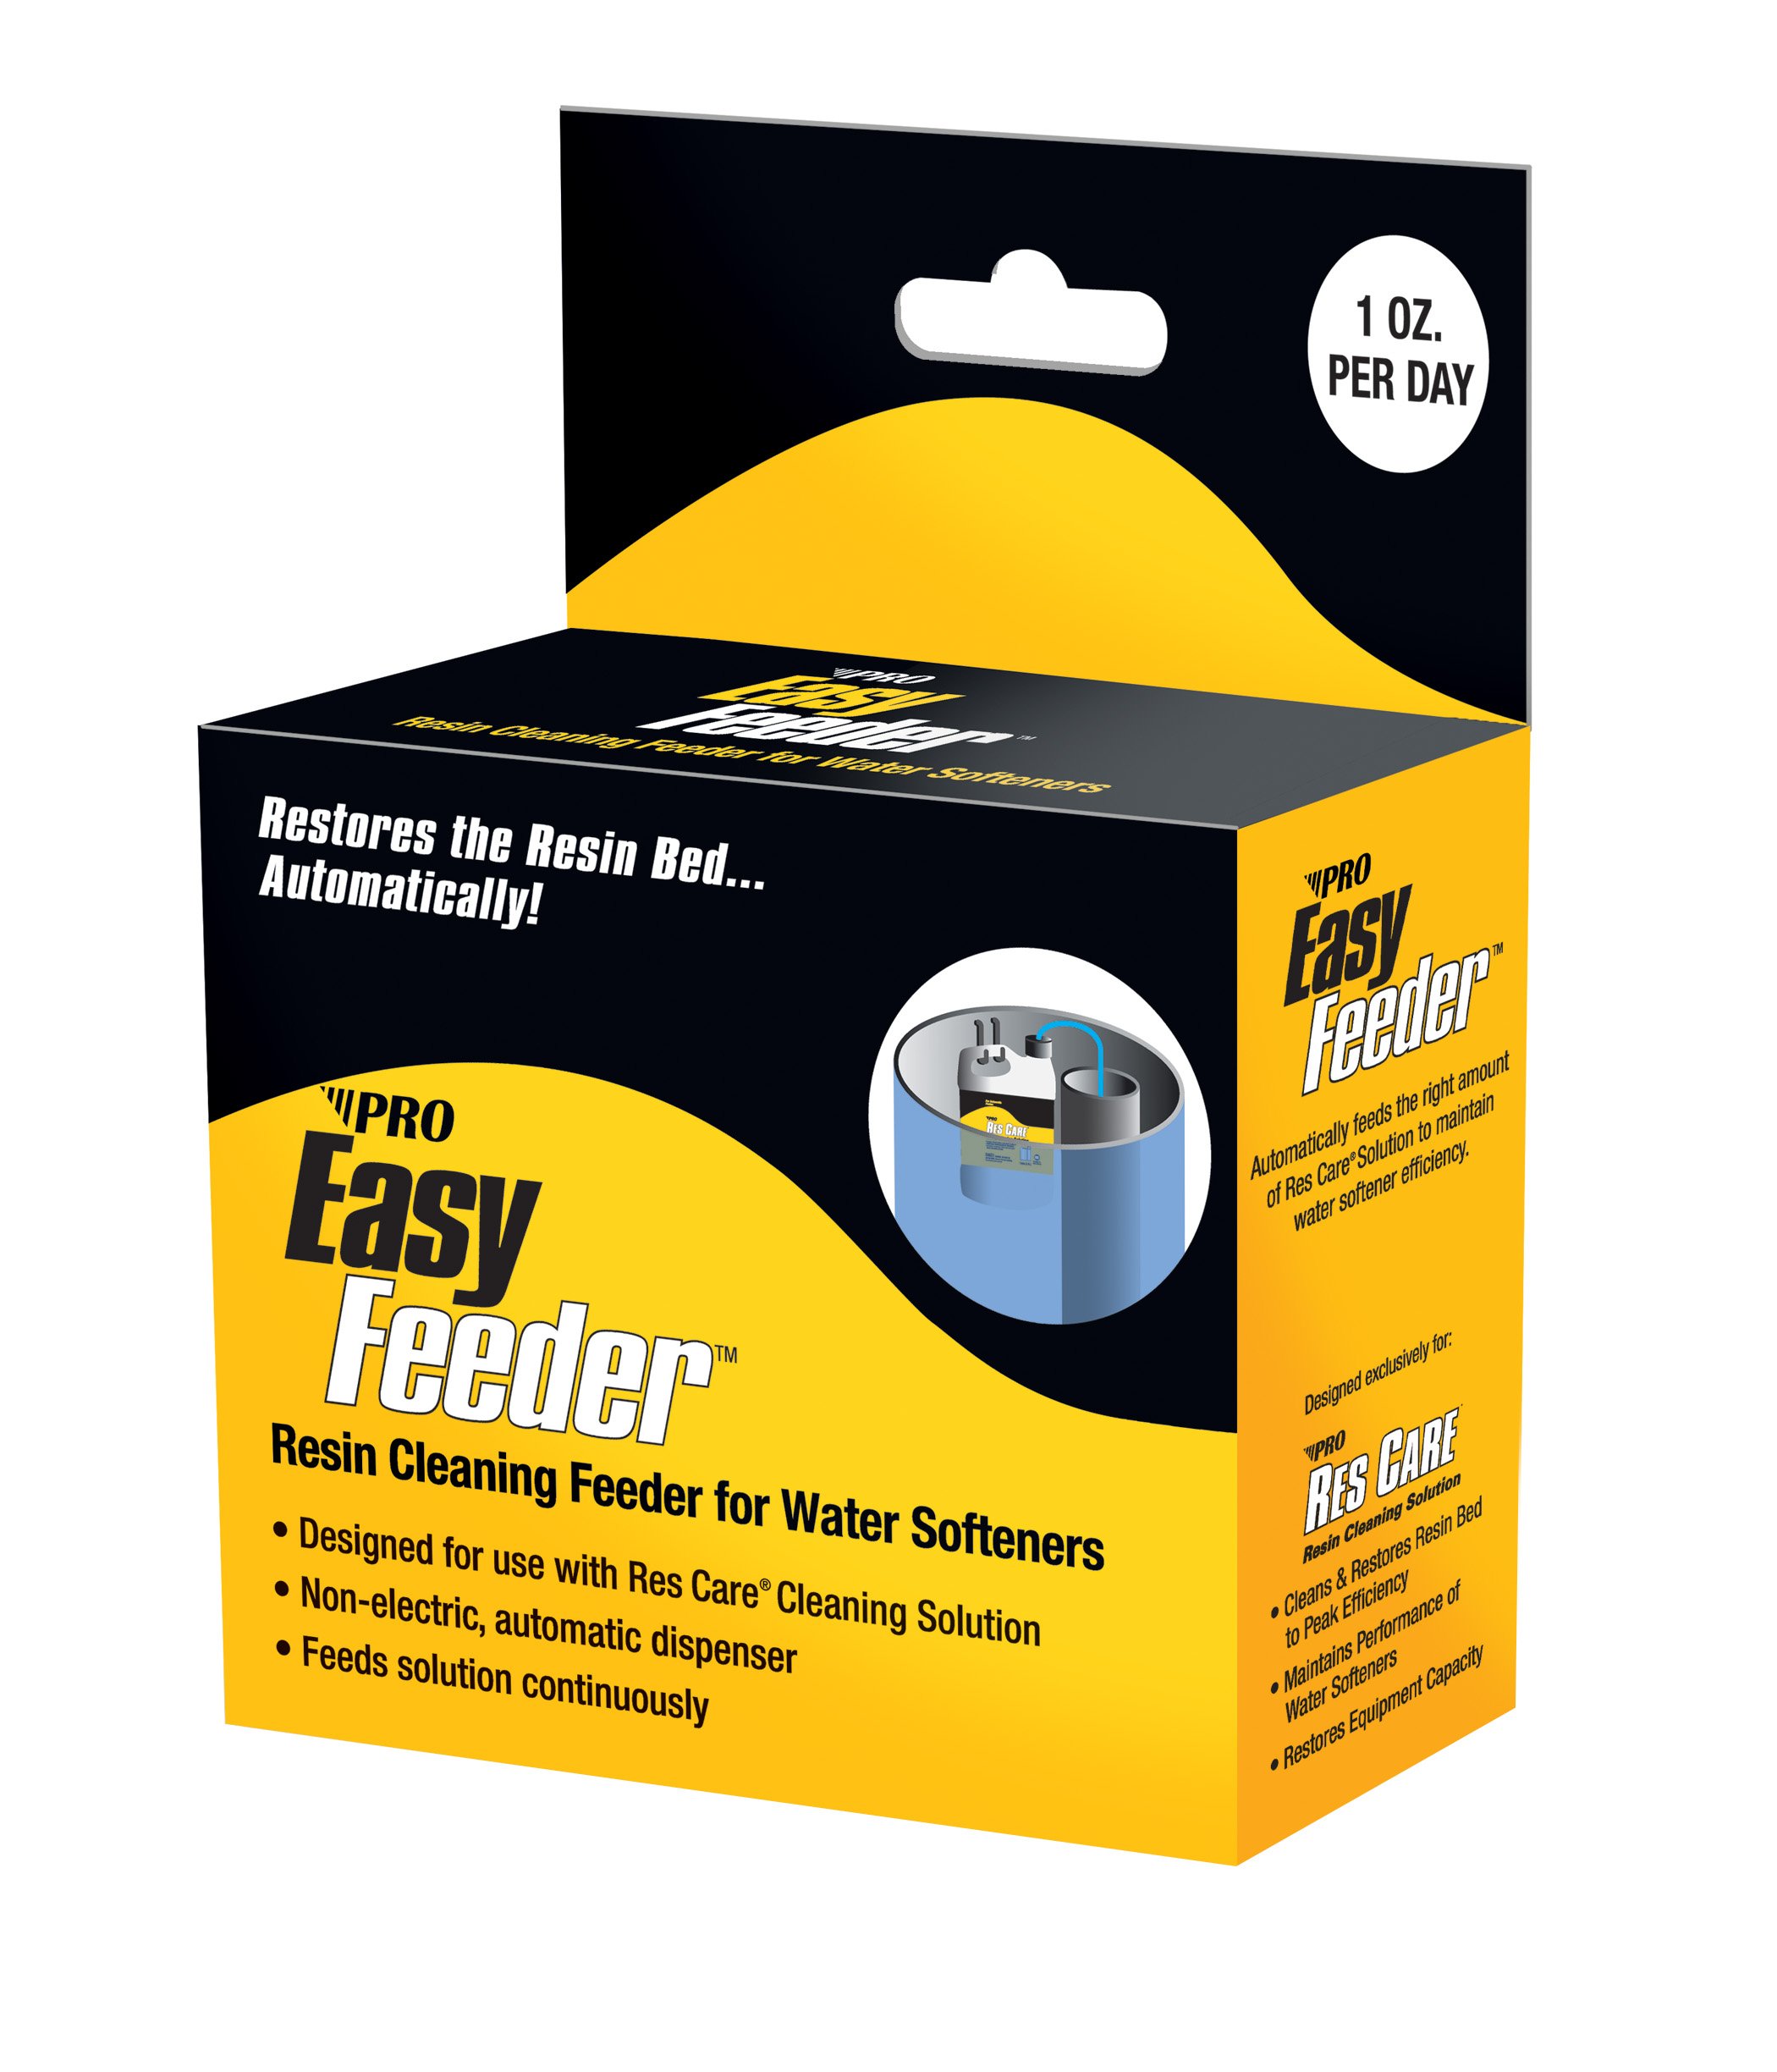 Res-Up Water Softener and Resin Cleaner